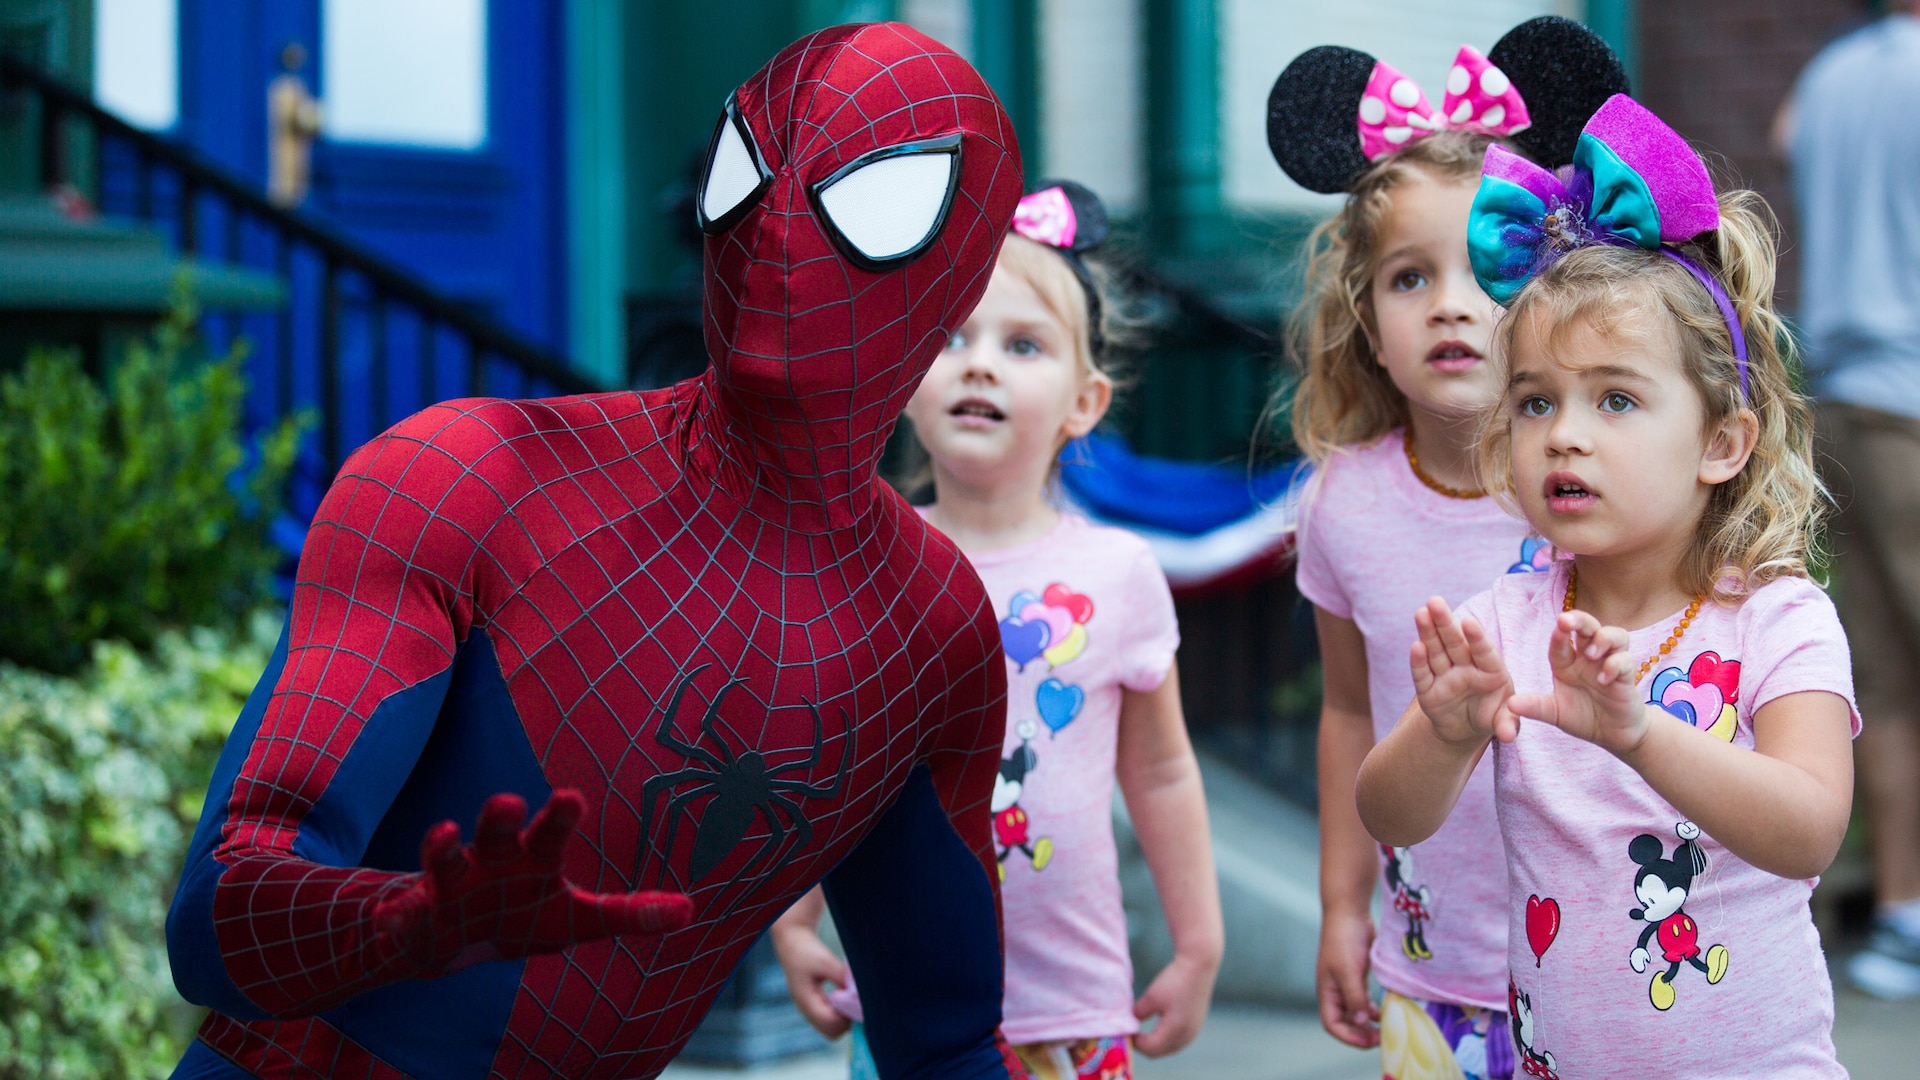 Spider Man strikes a kneeling action pose as 3 little girls look on